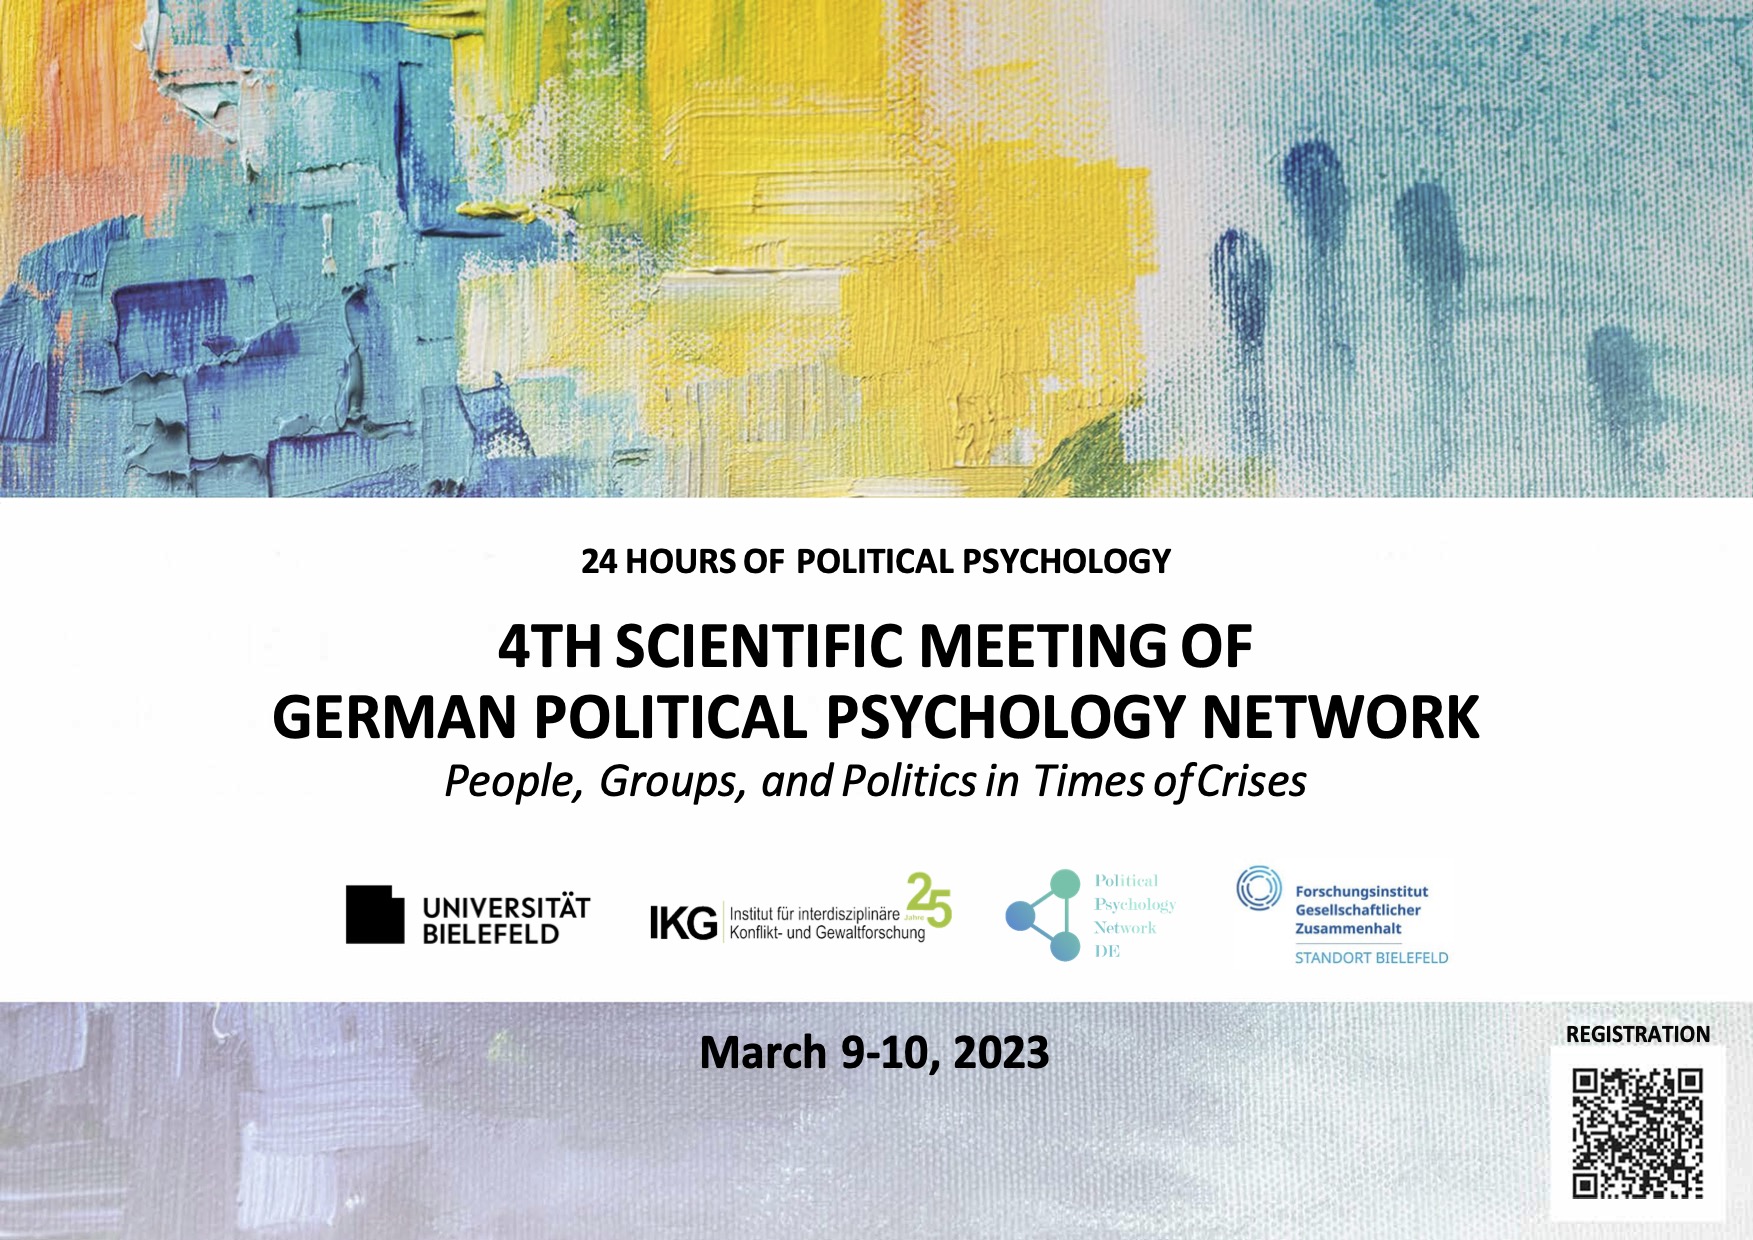 24 Hours of Political Psychology Conference: People, Groups, and Politics in Times of Crises